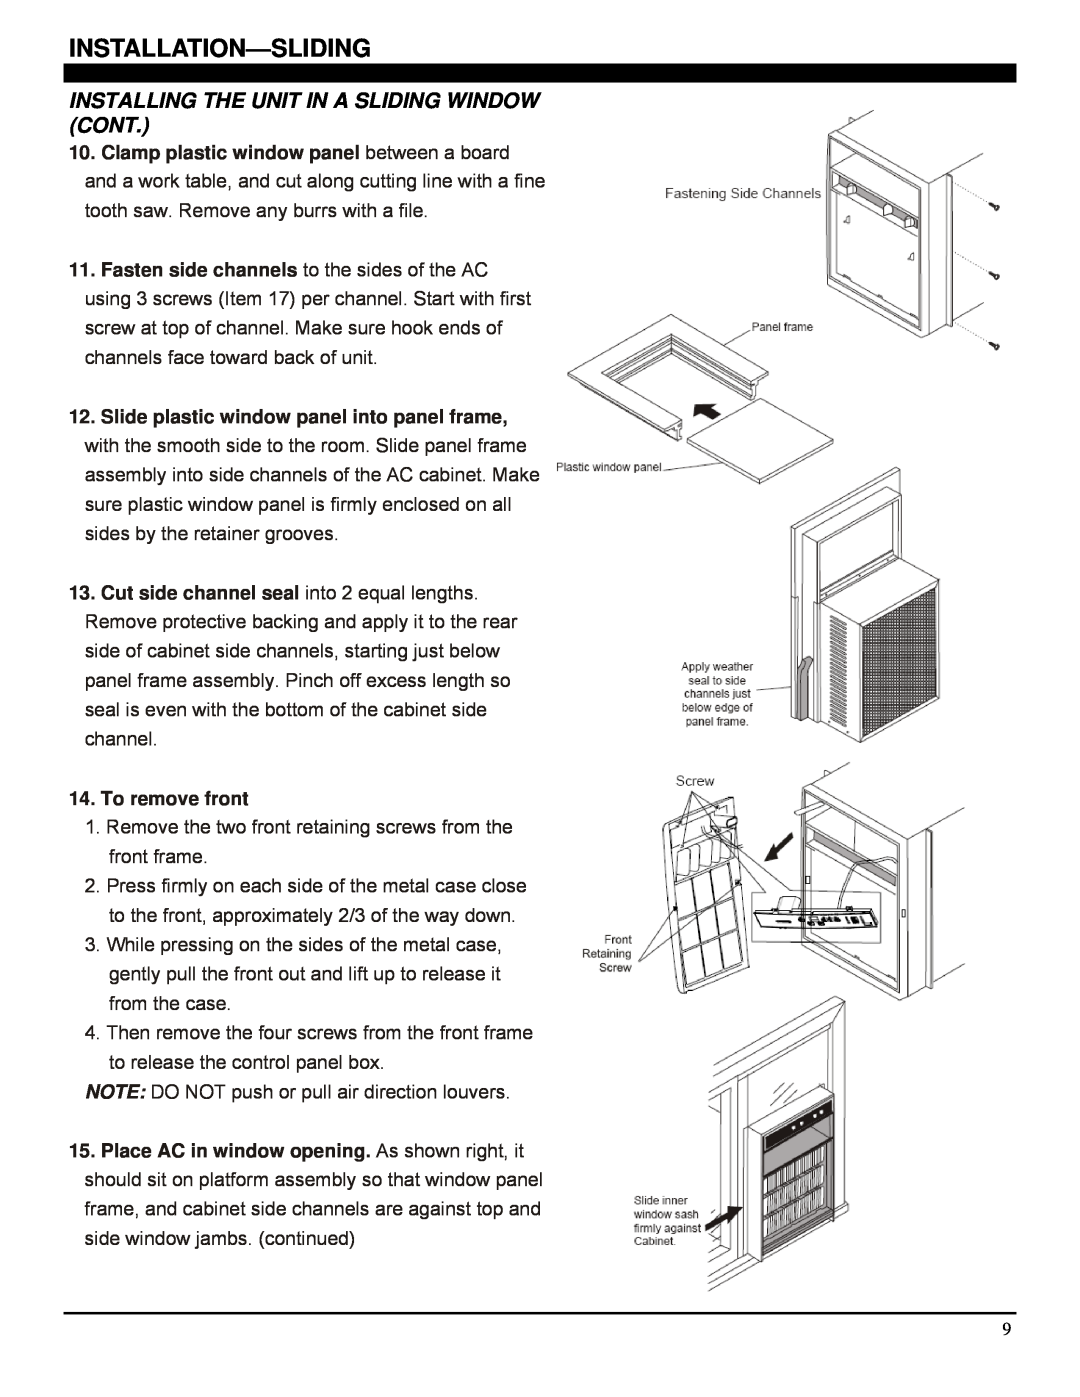 Soleus Air GM-CAC-10SE, GM-CAC-08ESE Installation-Sliding, Installing The Unit In A Sliding Window Cont, To remove front 